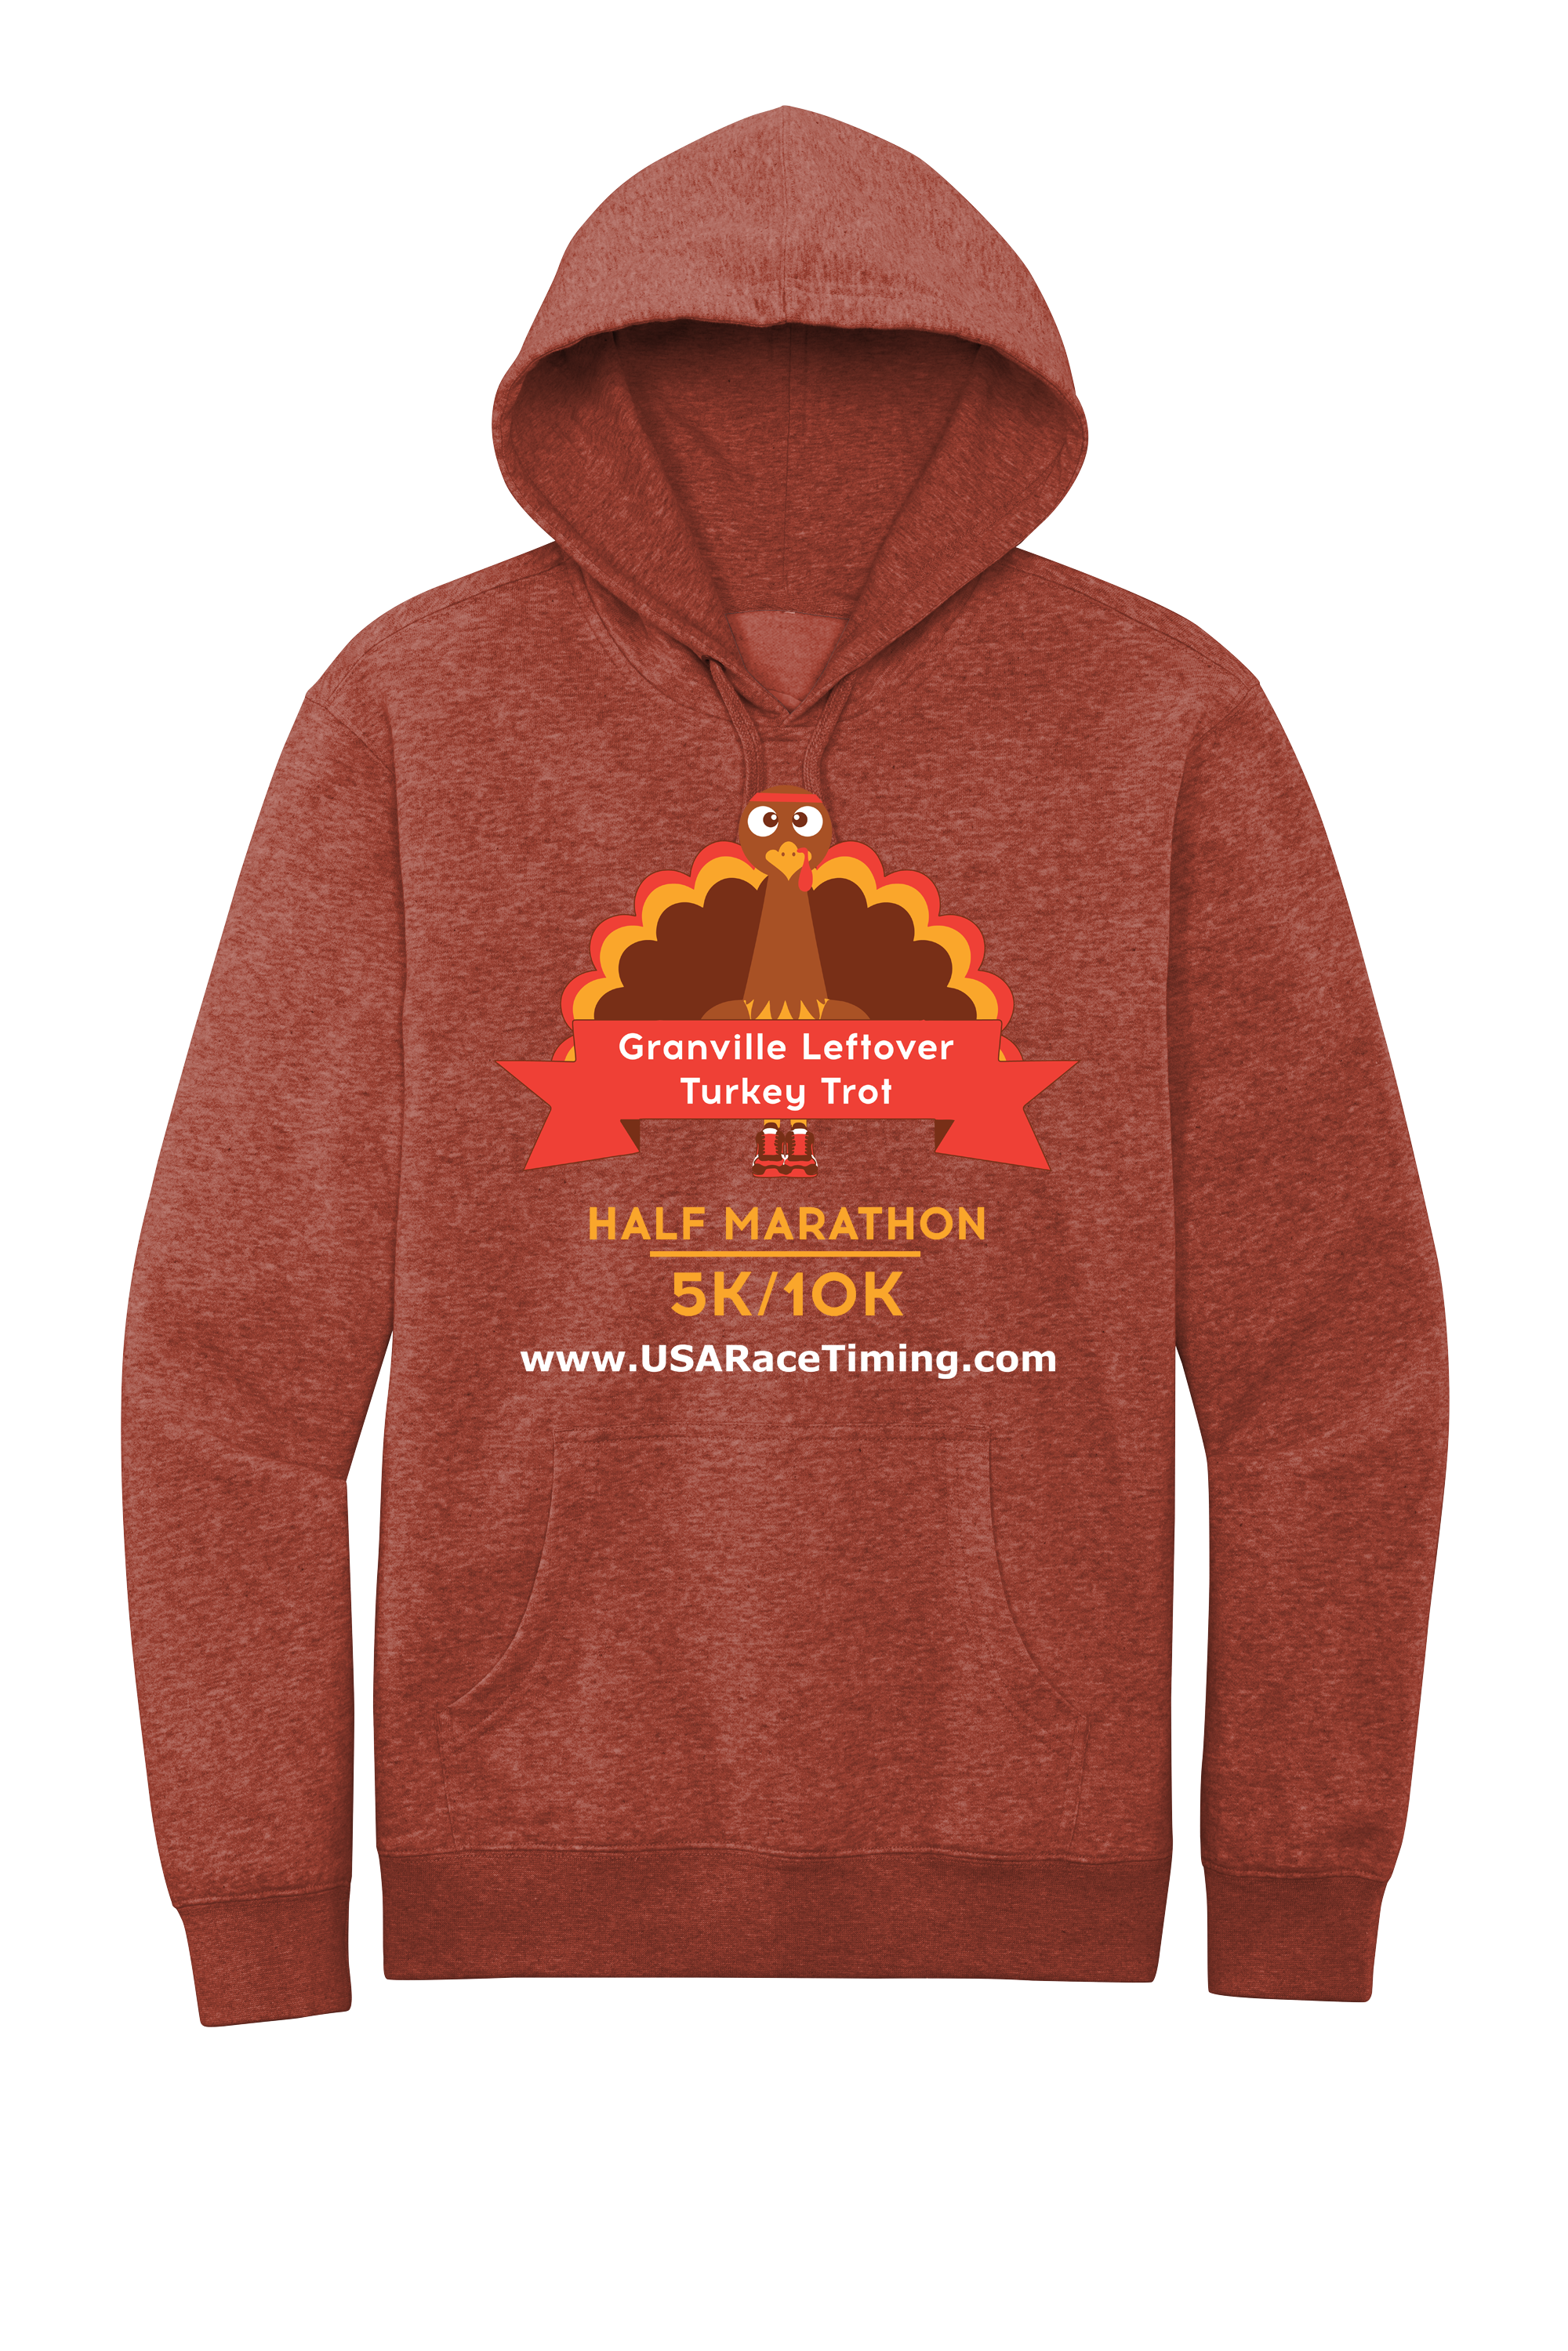 Johnstown, Alexandria & Granville Ohio Turkey Trot Official Long Sleeve Hooded Sweatshirt - Heathered Russet With Full Color Ink Print - Sport Tee Apparel Screen Printing - USA Race Timing - Johnstown Can - Charity Race - 5k, 10k & Half Marathon